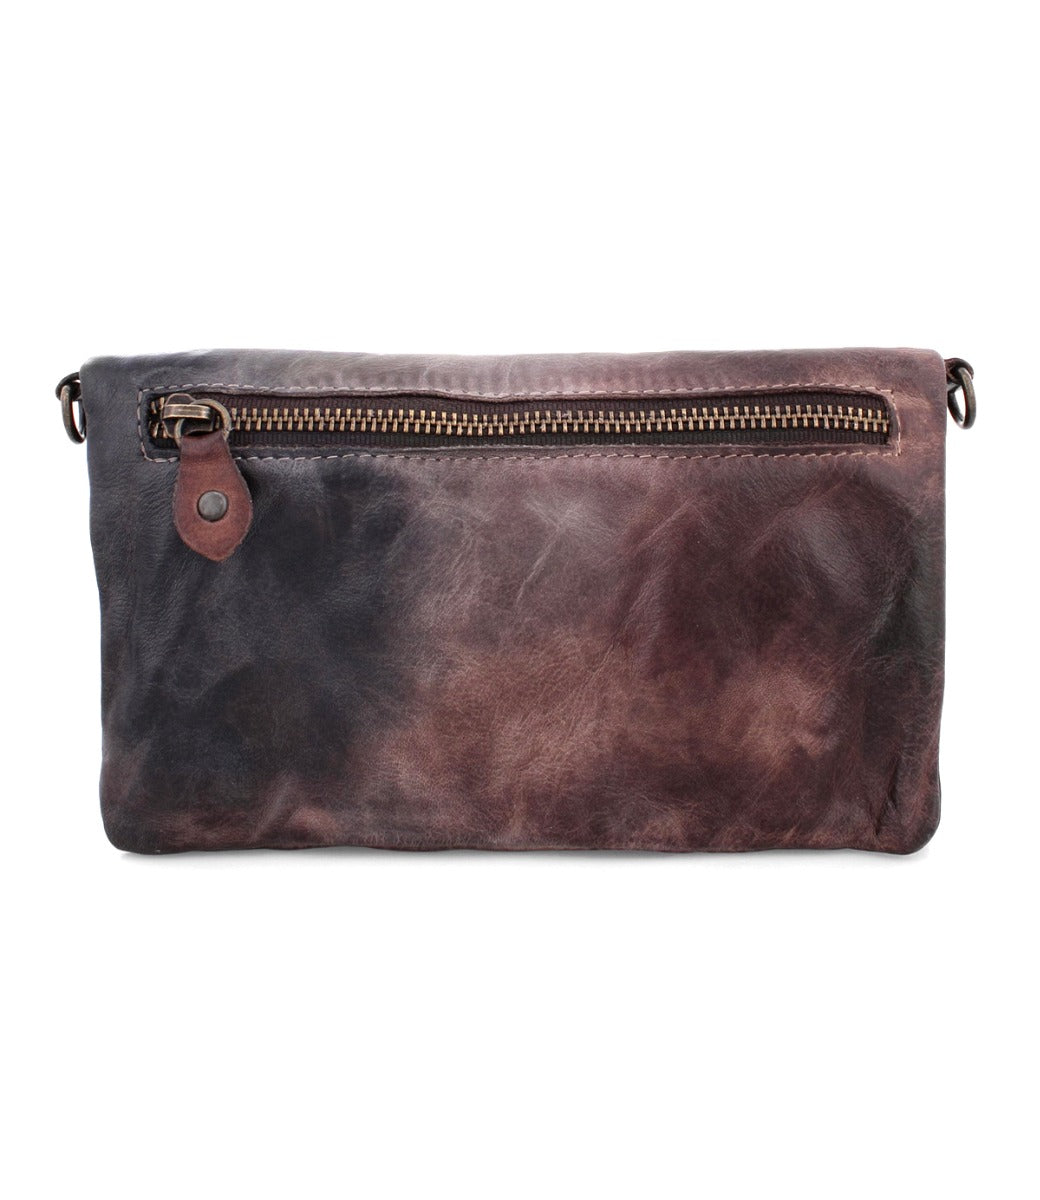 The Cadence tie dyed leather clutch bag by Bed Stu.